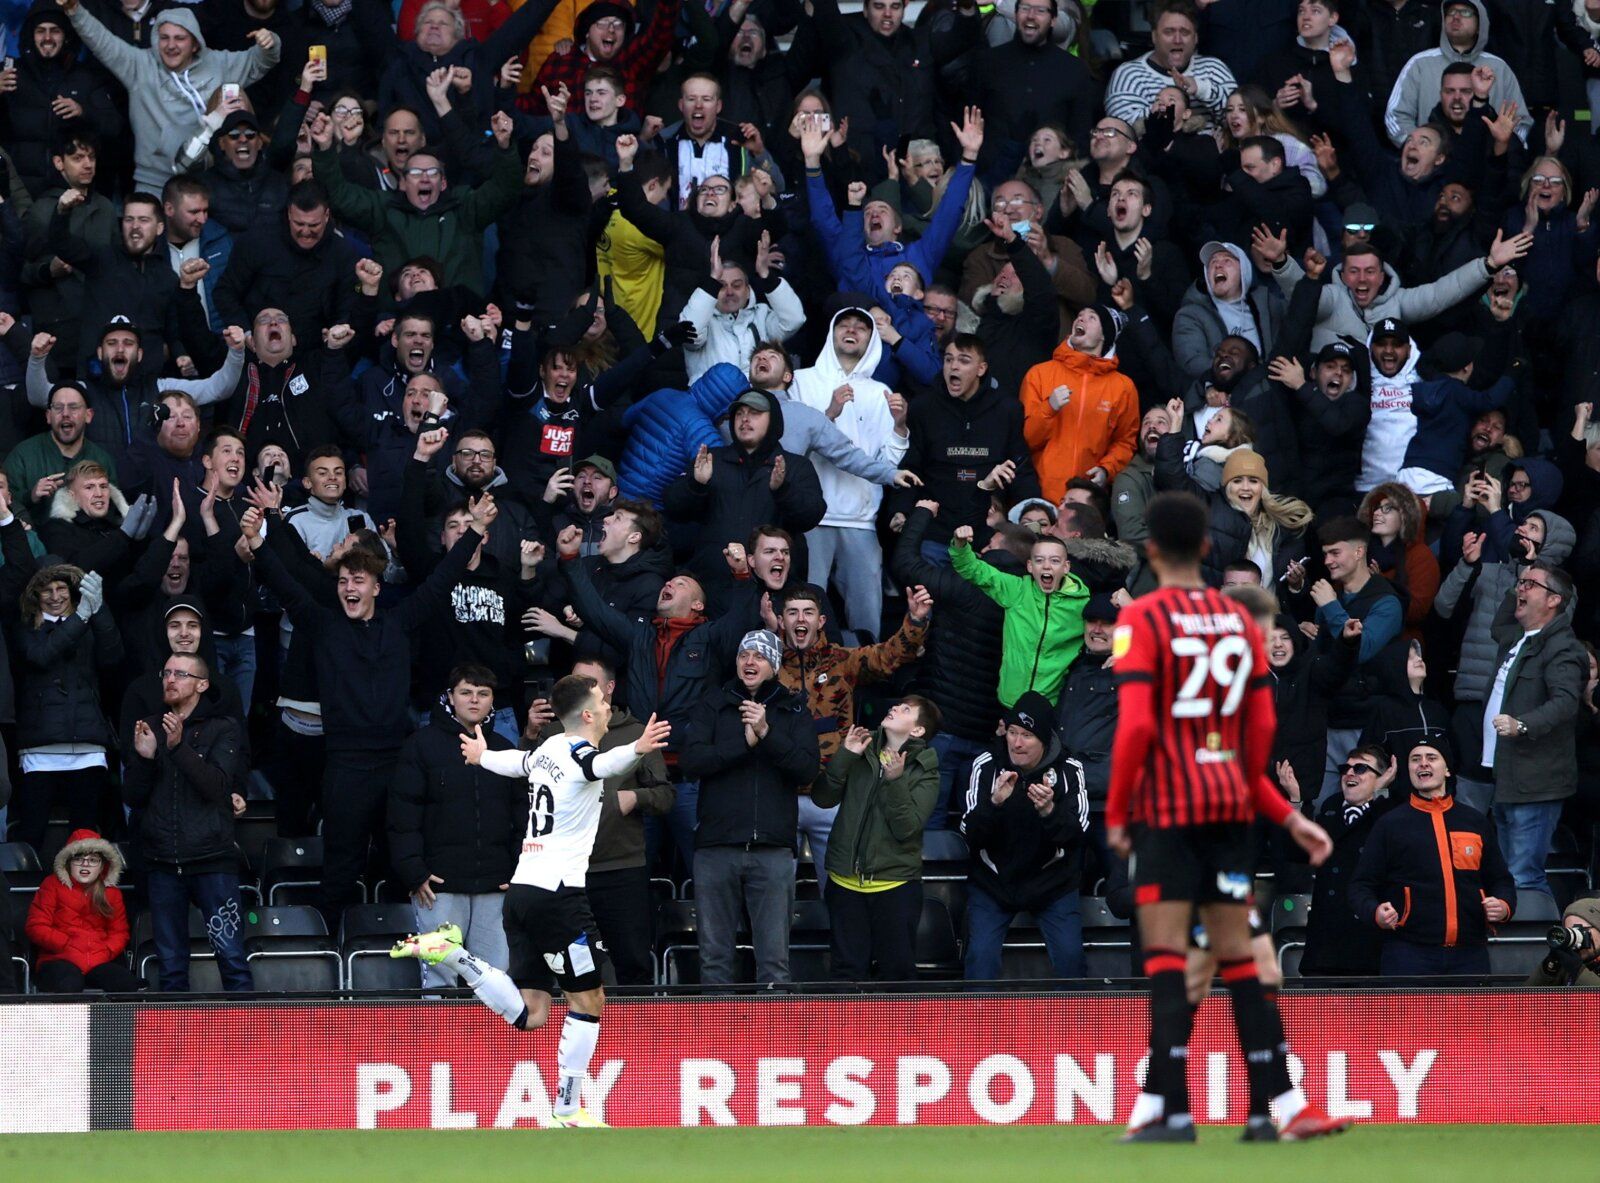 Soccer Football - Championship - Derby County v AFC Bournemouth - Pride Park, Derby, Britain - November 21, 2021 Derby County's Tom Lawrence celebrates scoring their third goal from the penalty spot Molly Darlington/Action Images